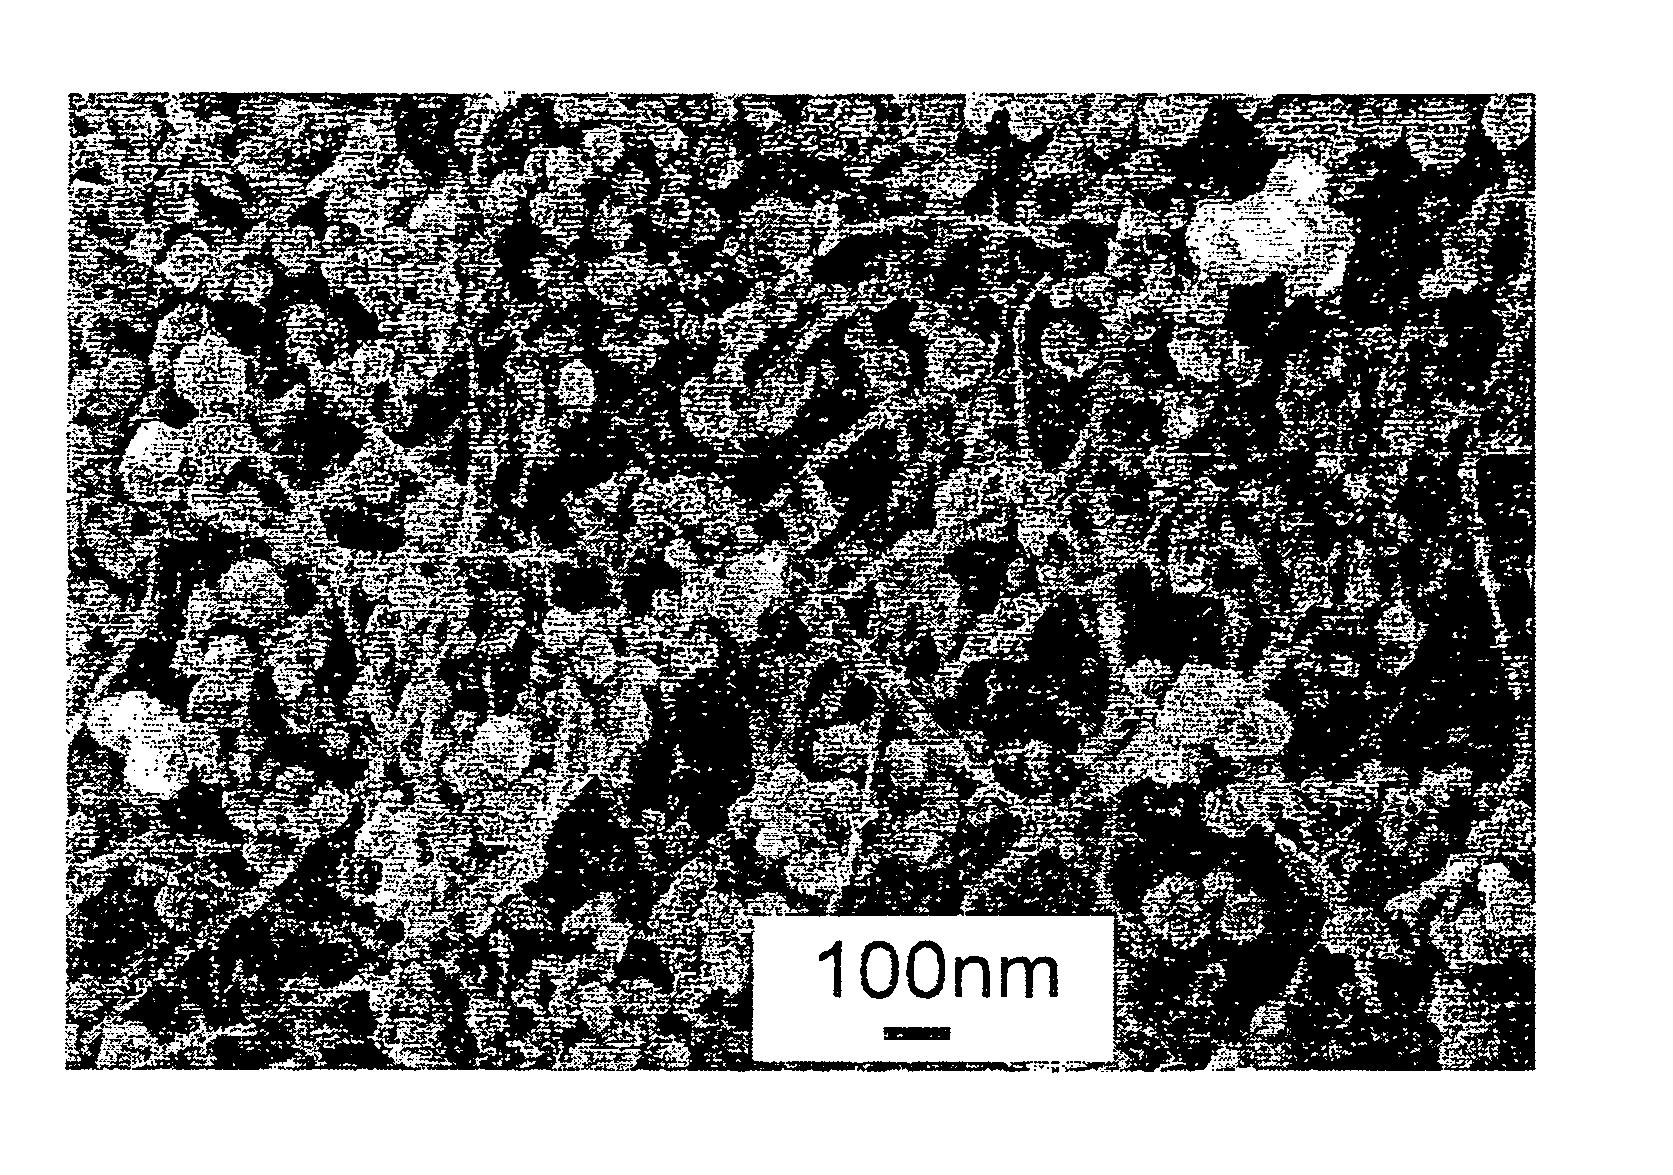 Carbon nanotube-carbon nanohorn complex and method for producing the same